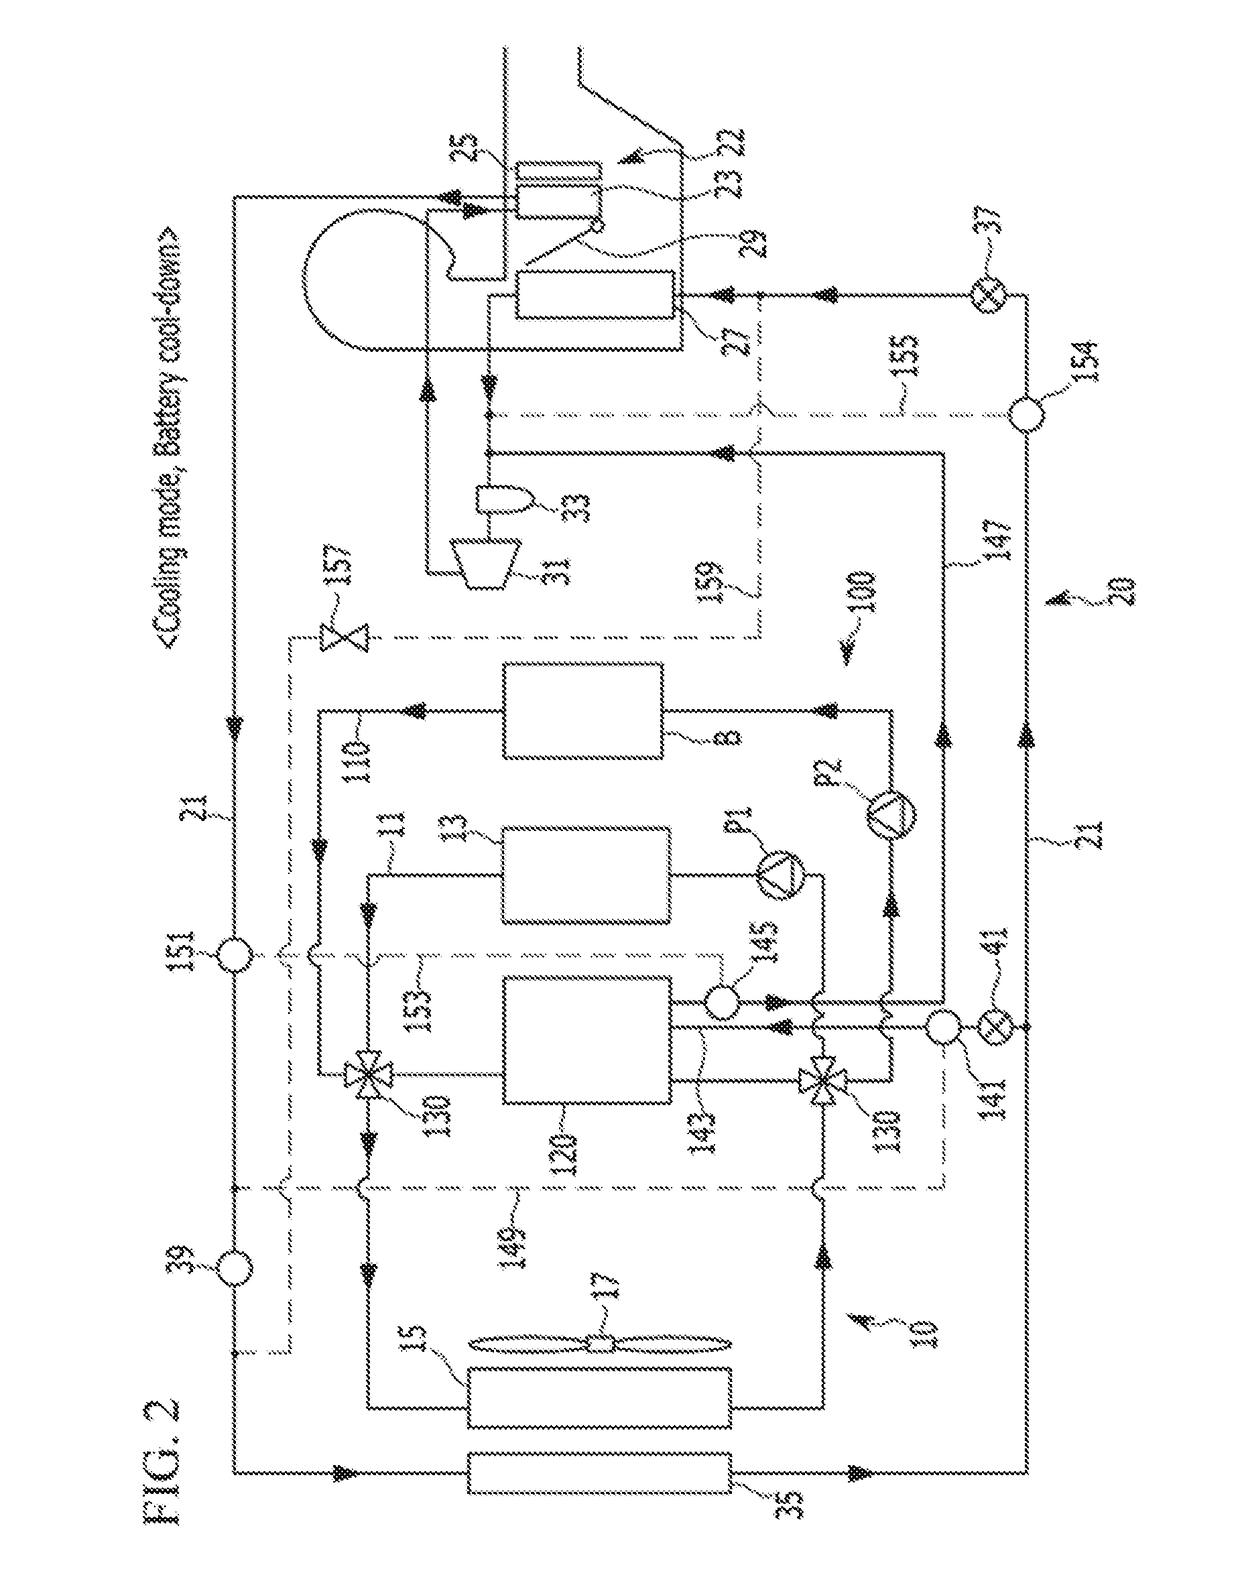 Battery cooling system for a vehicle